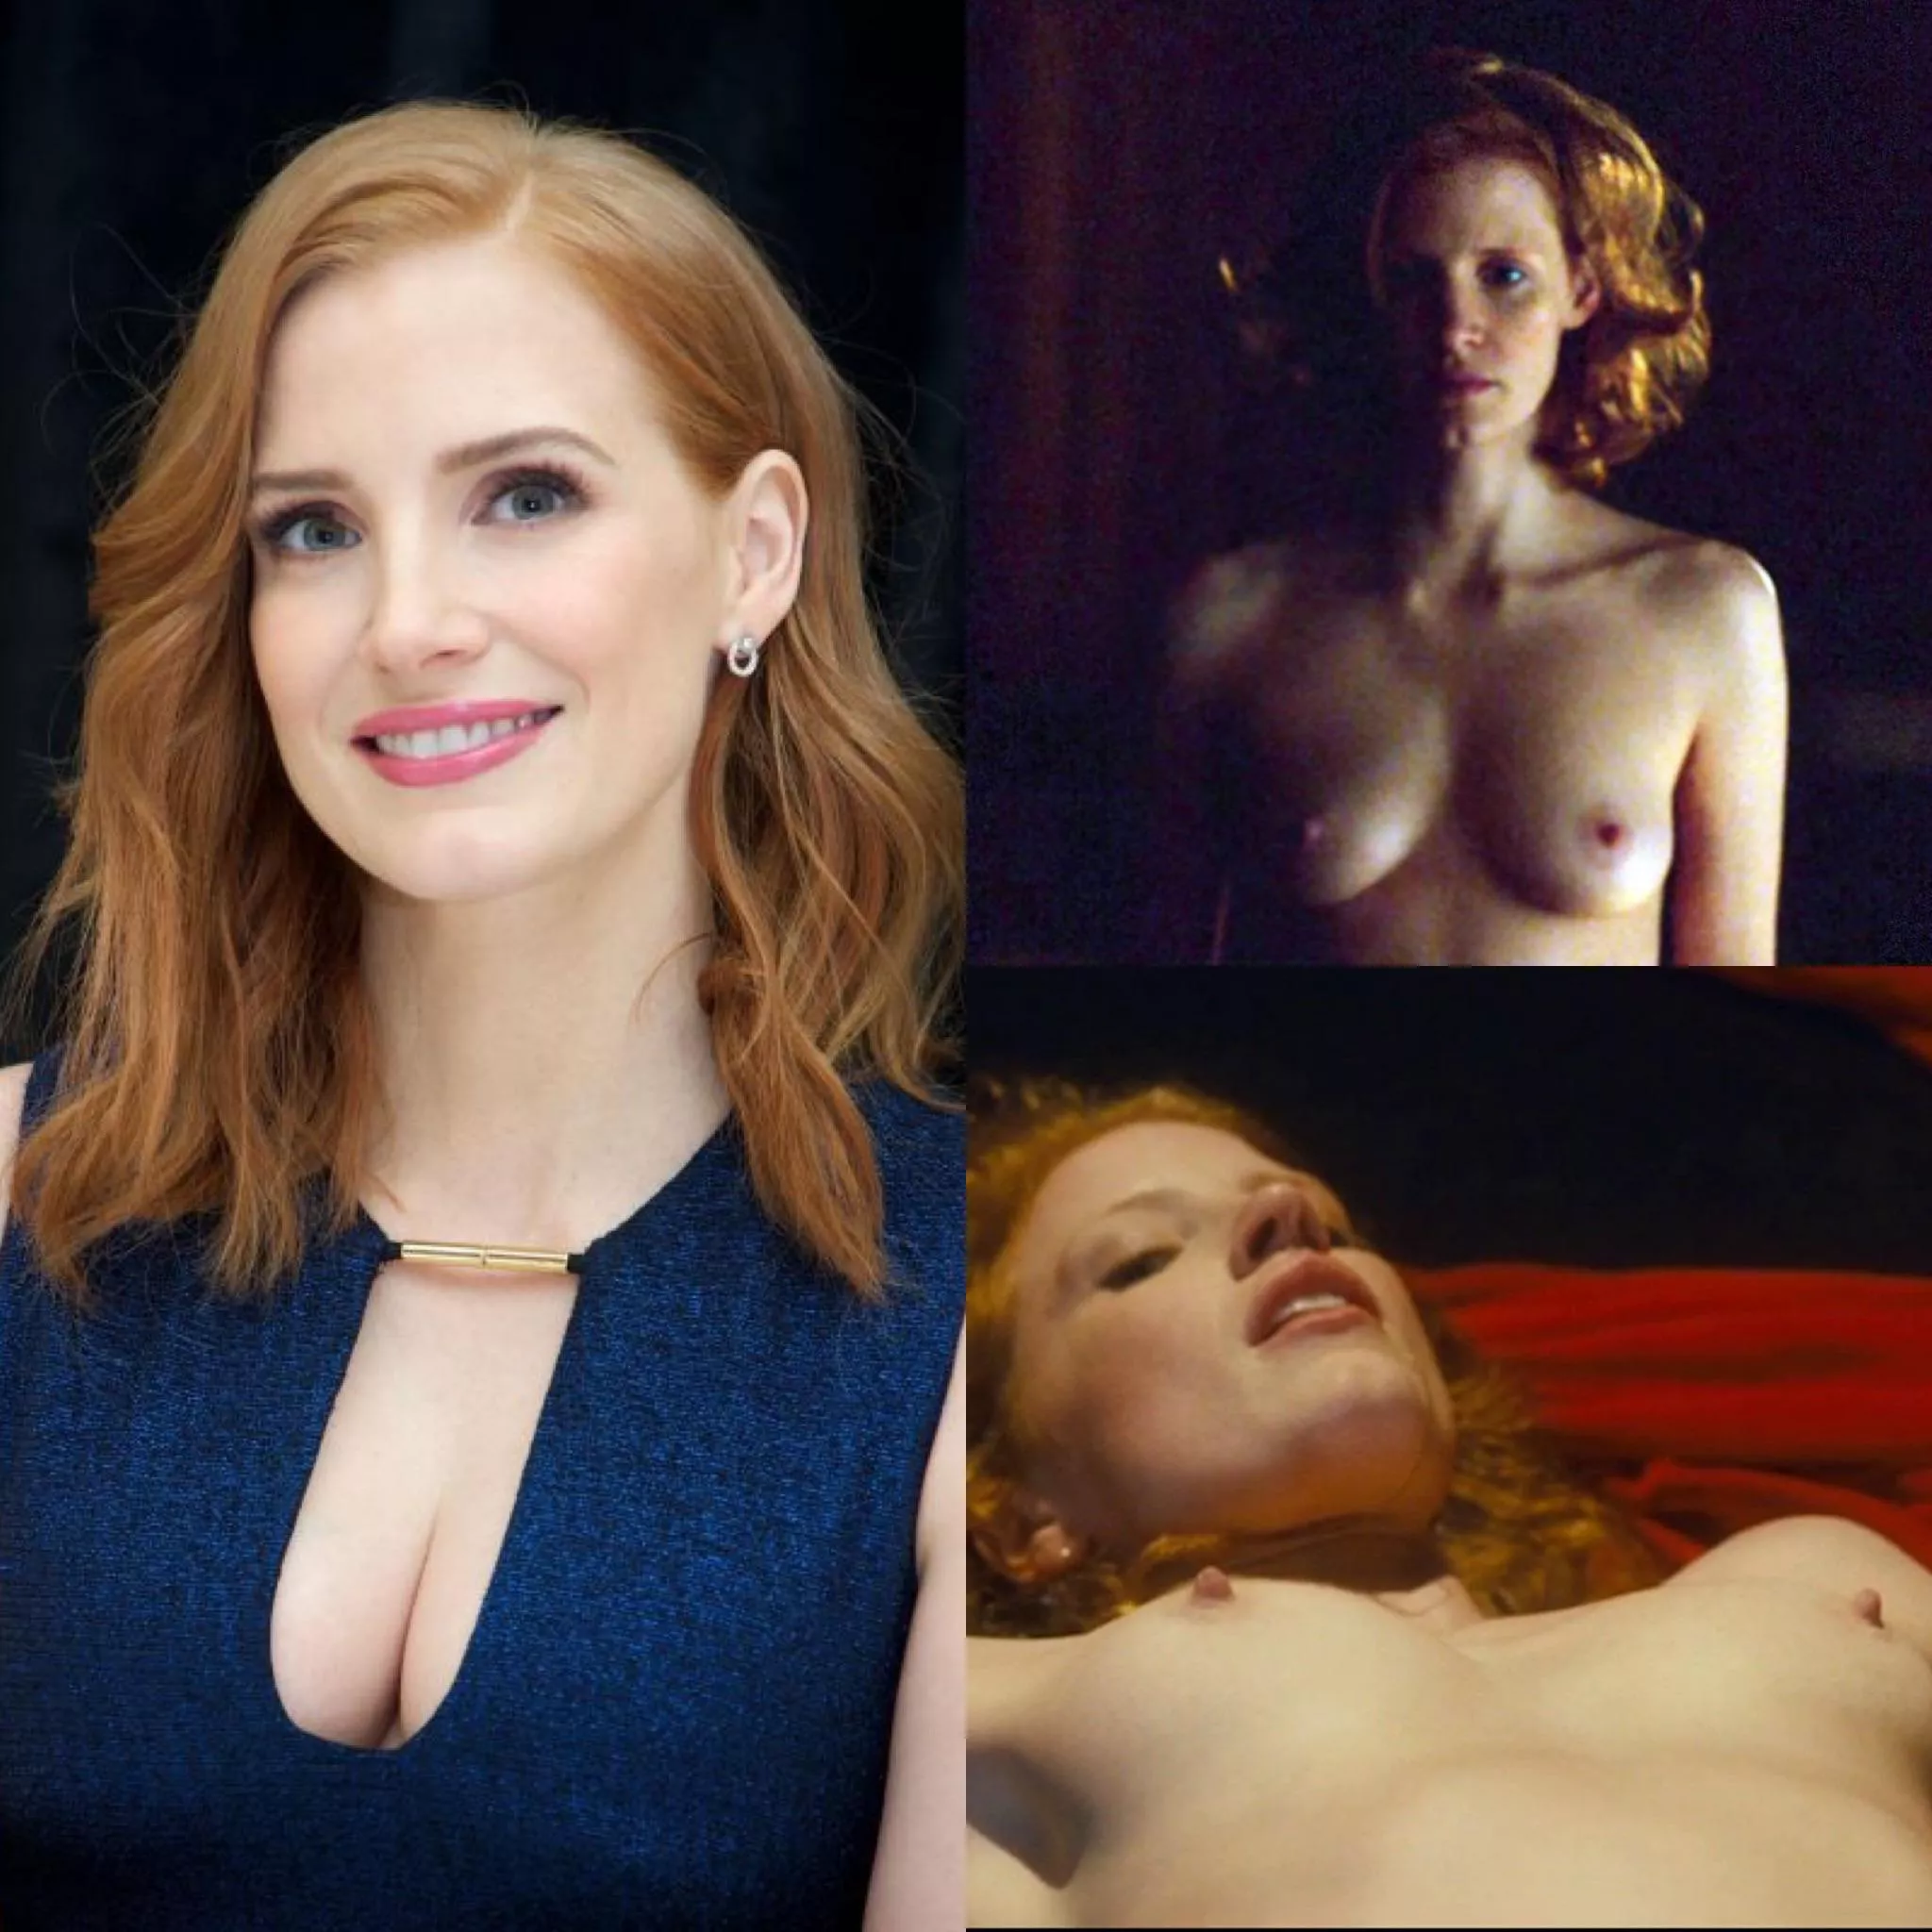 Intimate moments: jessica chastain goes nude in artistic photography